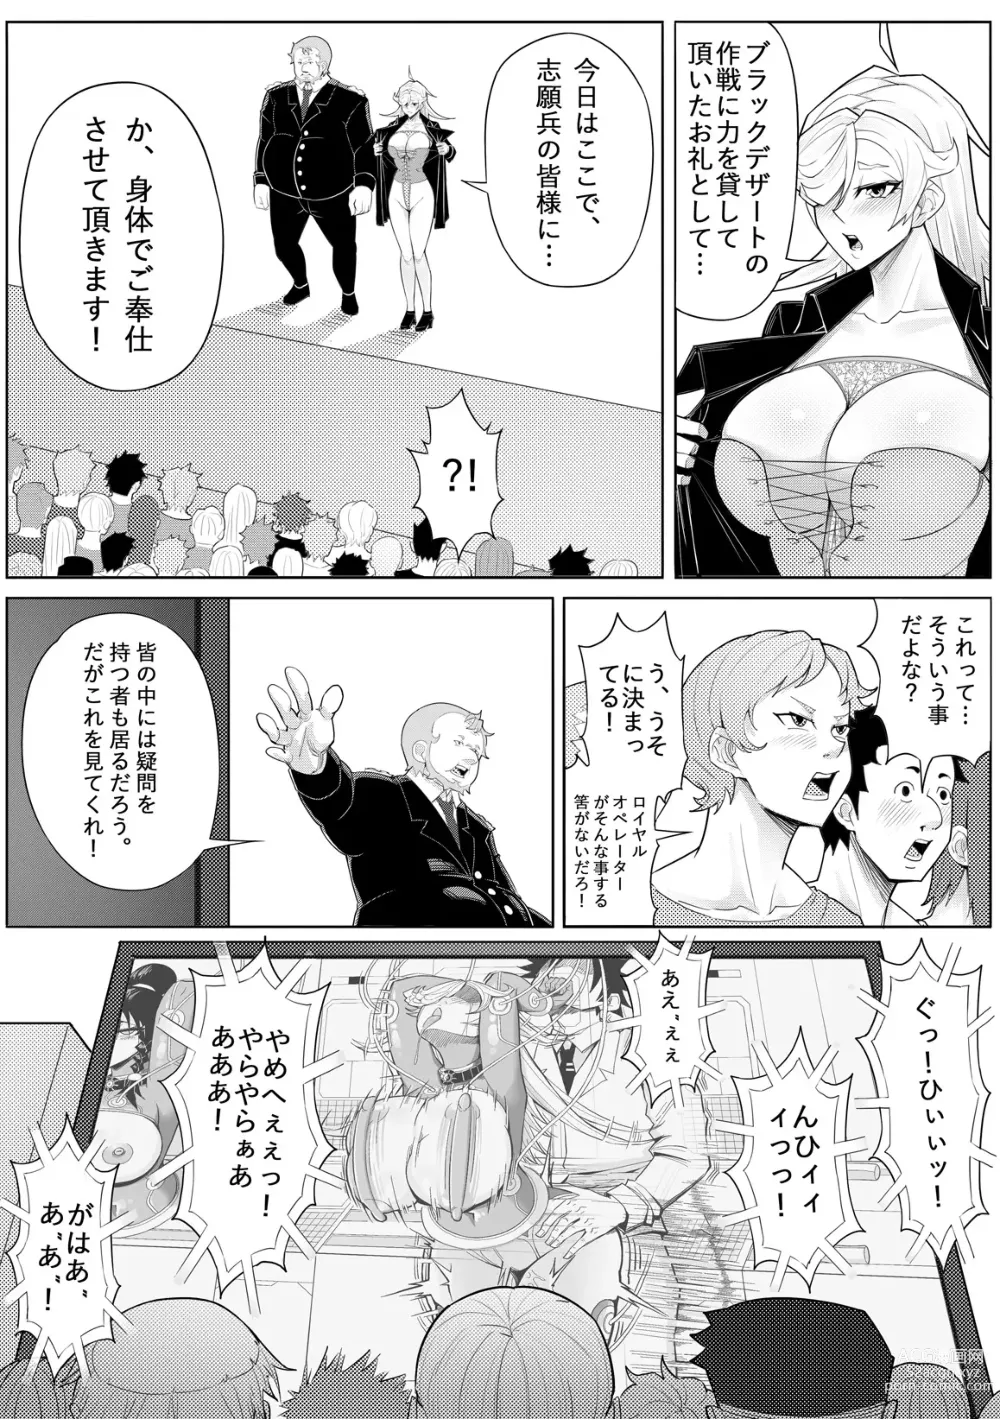 Page 24 of doujinshi Skin Normal Mission 04